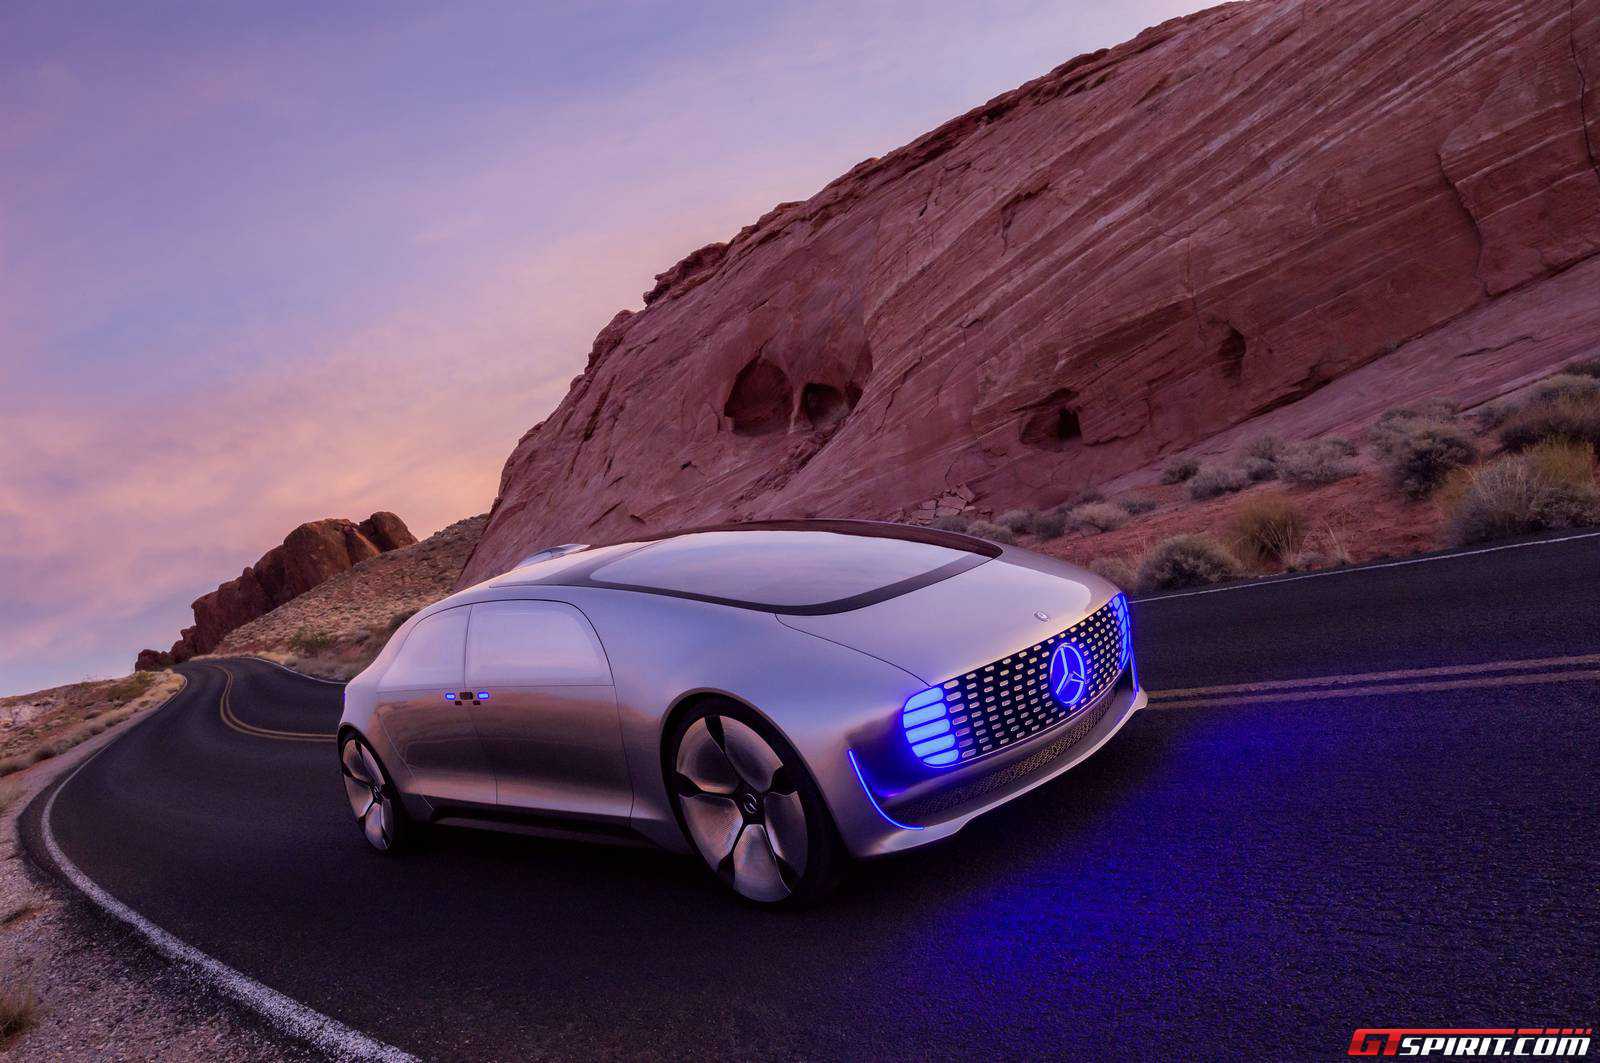 2015 Mercedes Benz F015 Luxury In Motion Concept